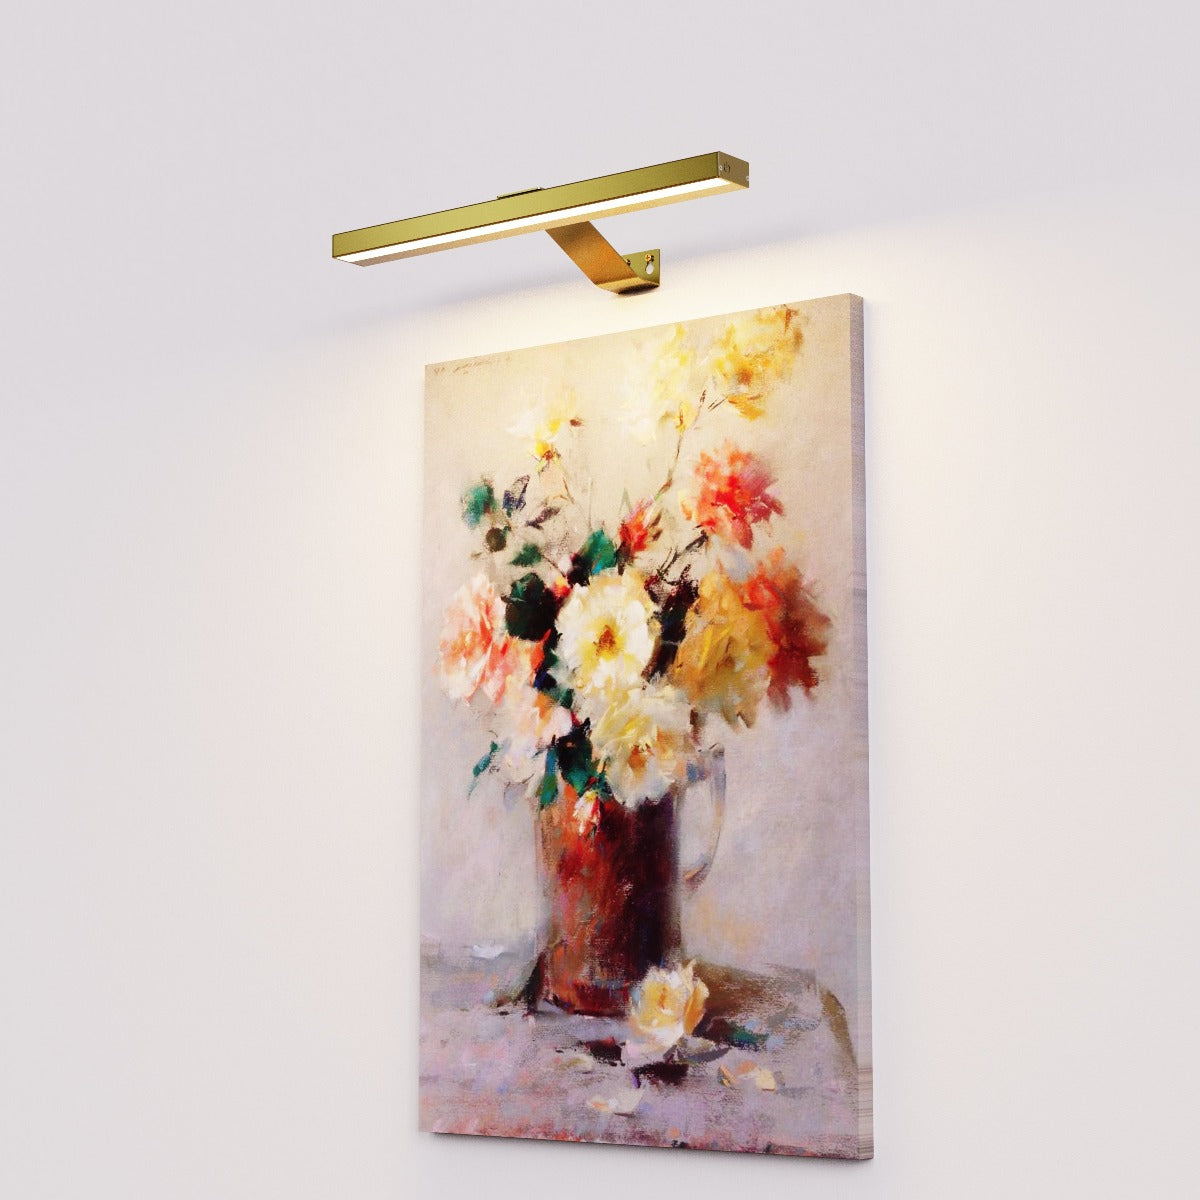  Libra's elegant and stylish finish makes it the ideal addition to any room. It will look perfect in both traditional and modern environments. The beauty of this wall light means you can install it on any wall without the requirement of expensive electrician fees and mains installation.